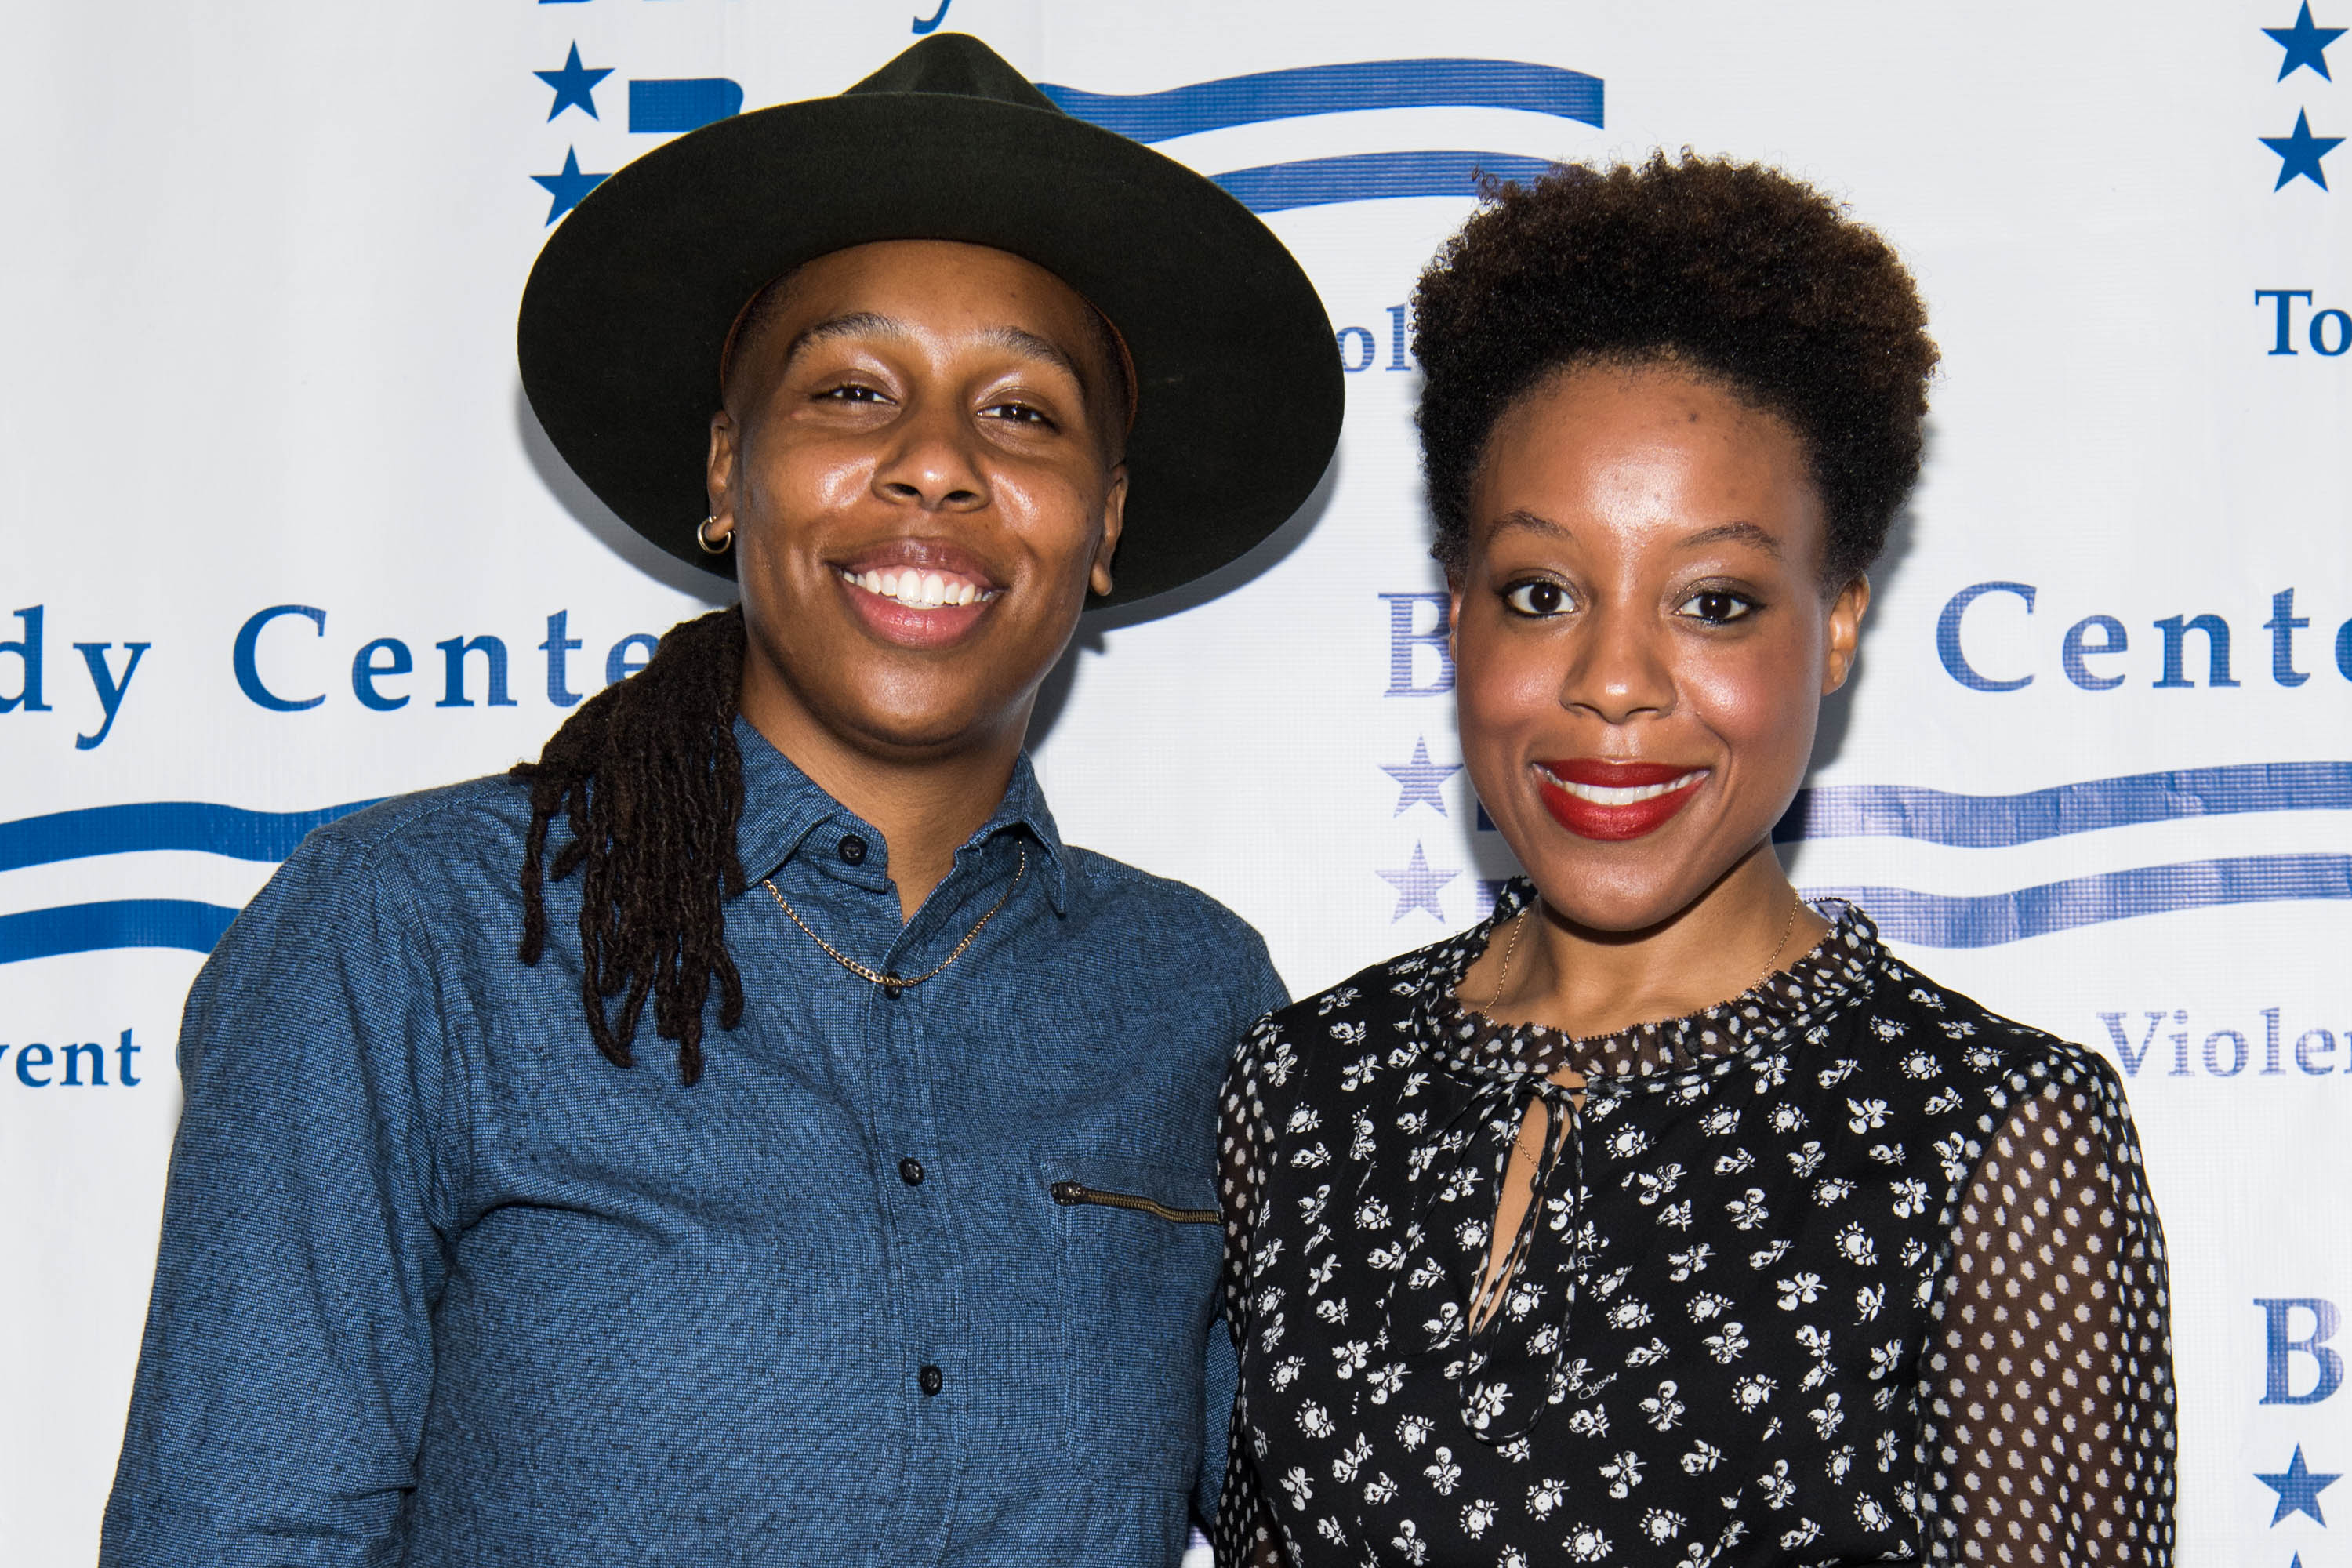 Lena Waithe and new wife, Alana Mayo at an awards gala in June 2017. | Photo: Getty Images